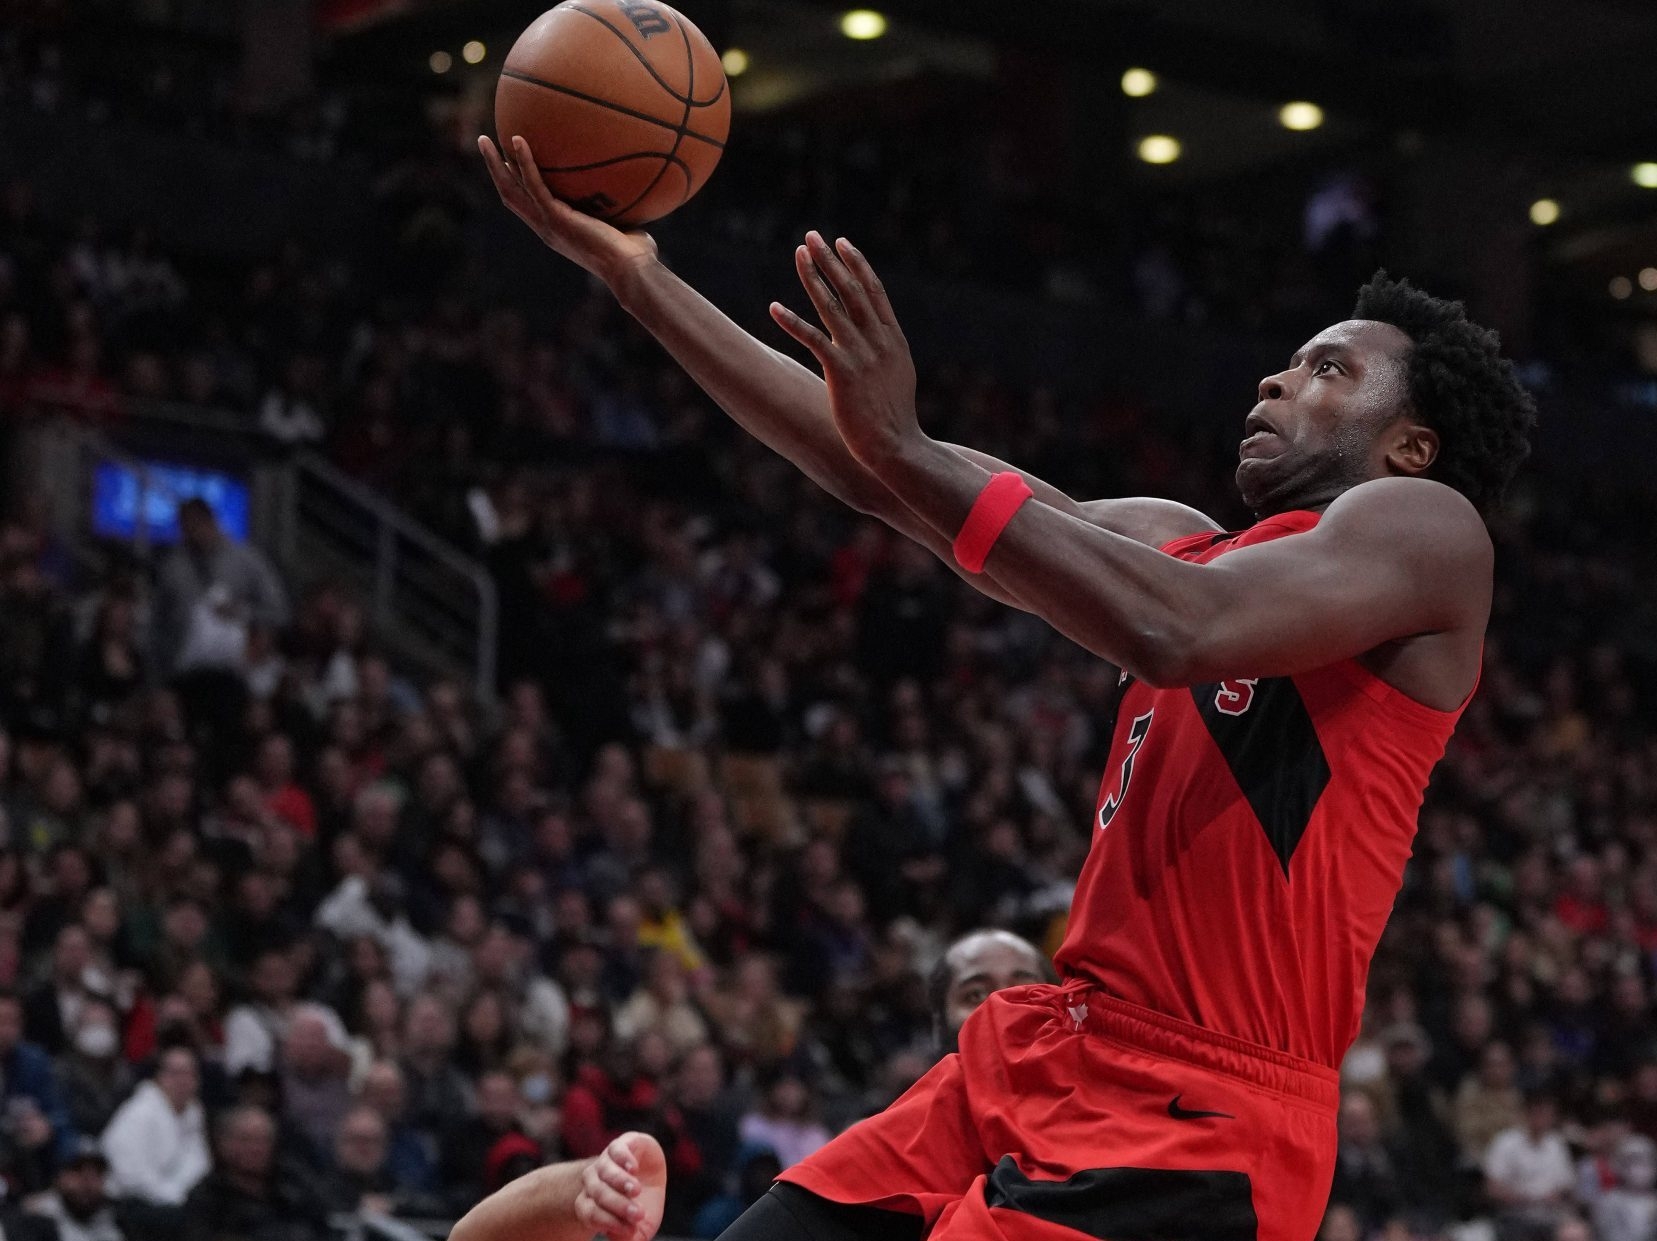 RAPTORS BLOG: O.G. Anunoby was at top of his game in loss against Sixers